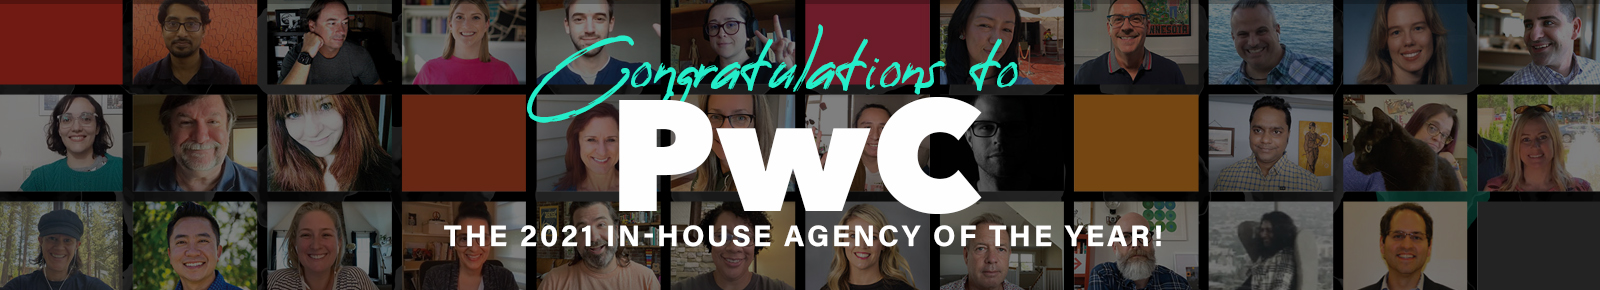 Congratulations to PWC, the 2021 In-House Agency of the Year!